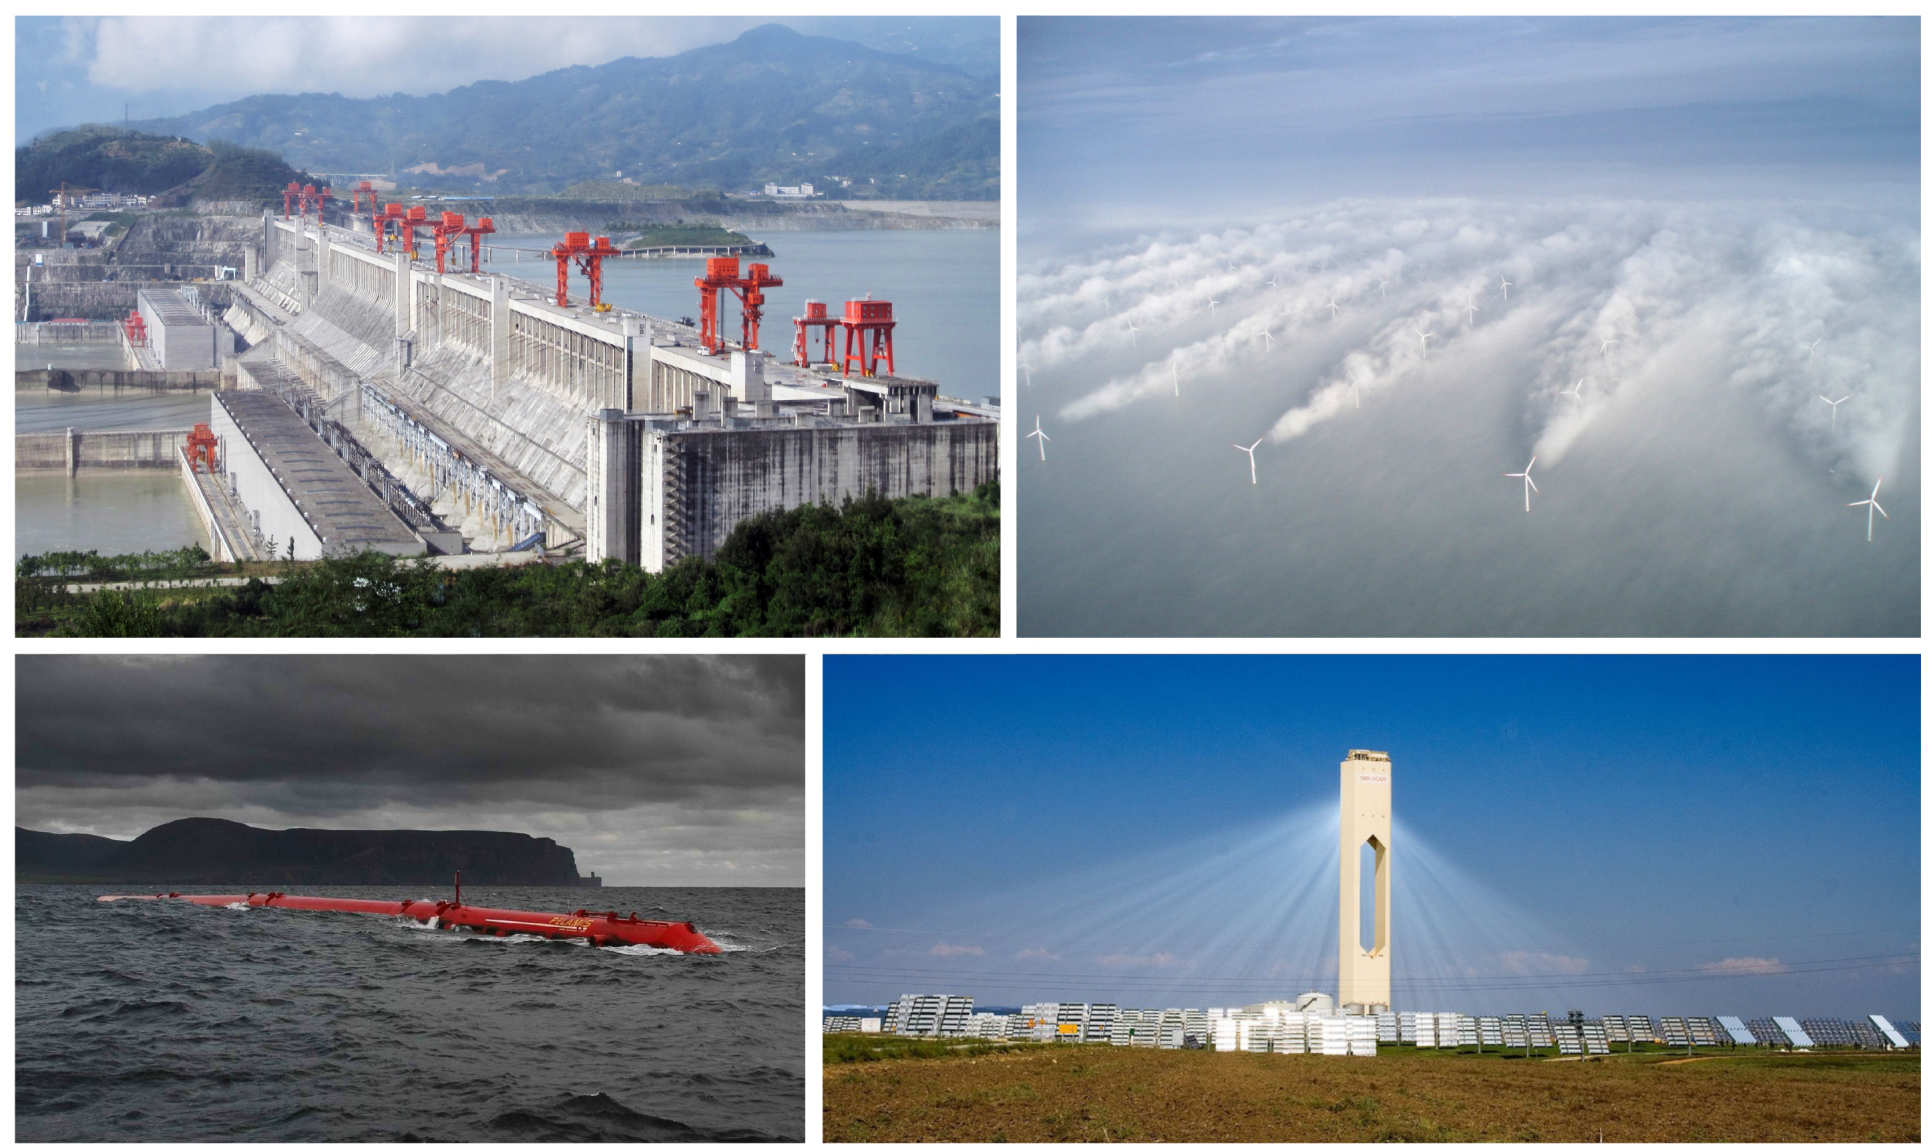 [Top-left] Three Gorges Dam, China, [Top-right] Wake from offshore wind turbine array, [Bottom-left] Pelamis wave energy converter, [Bottom-right] Solar power tower, Seville, Spain.